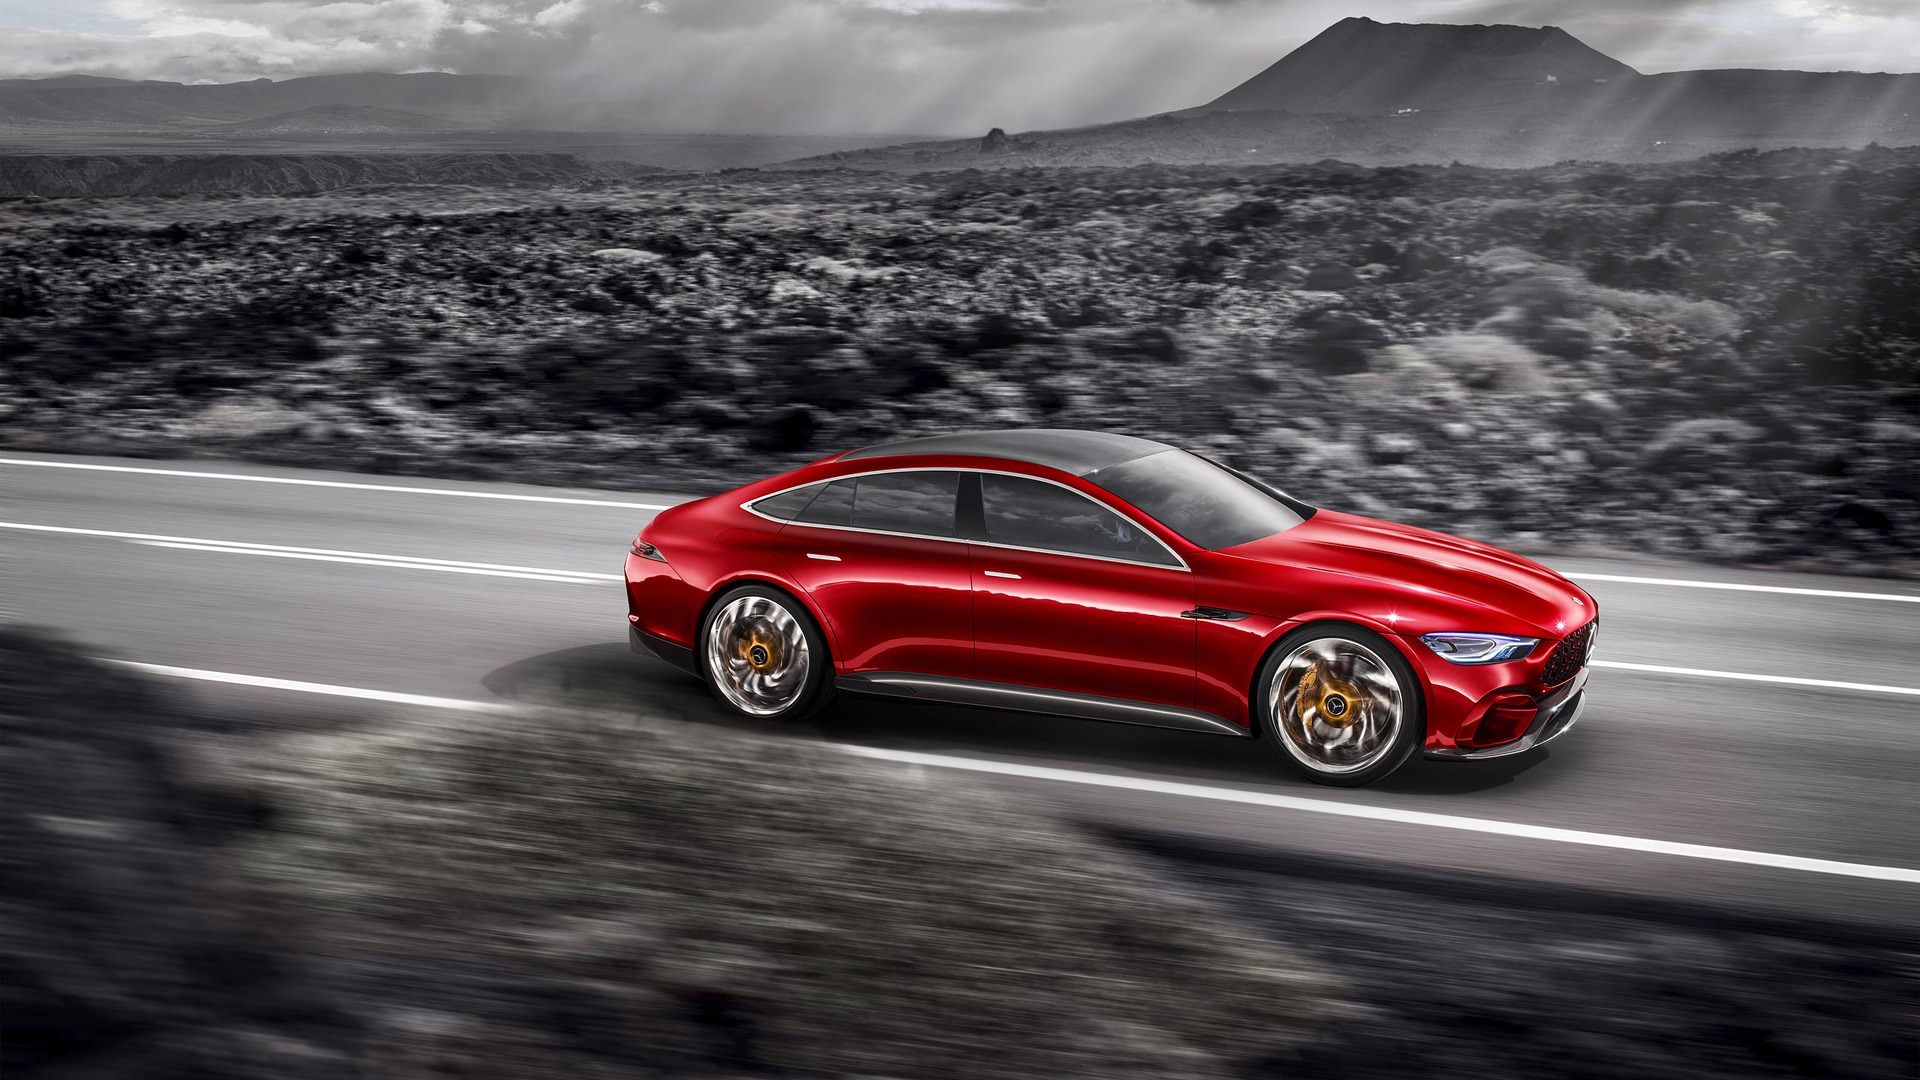 Mercedes-AMG GT concept Coupe / خودروی مفهومی کوپه مرسدس AMG GT